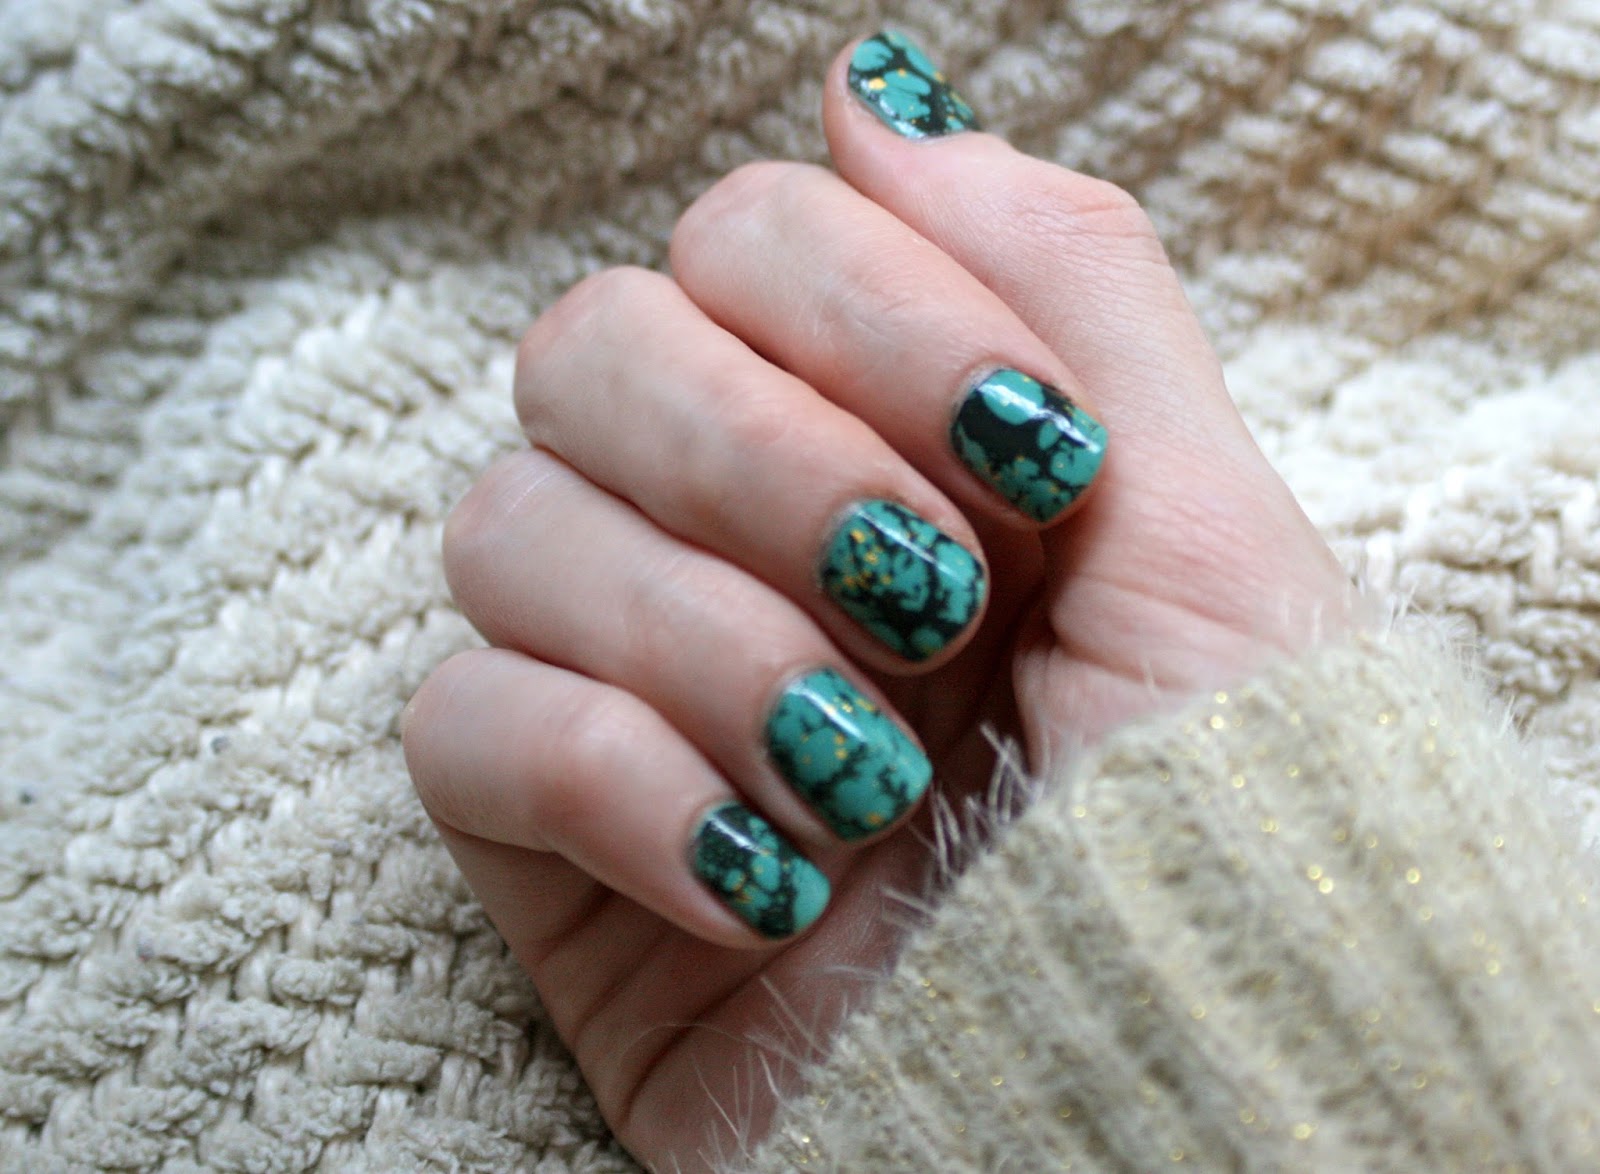 1. Turquoise and Gold Nail Art - wide 2